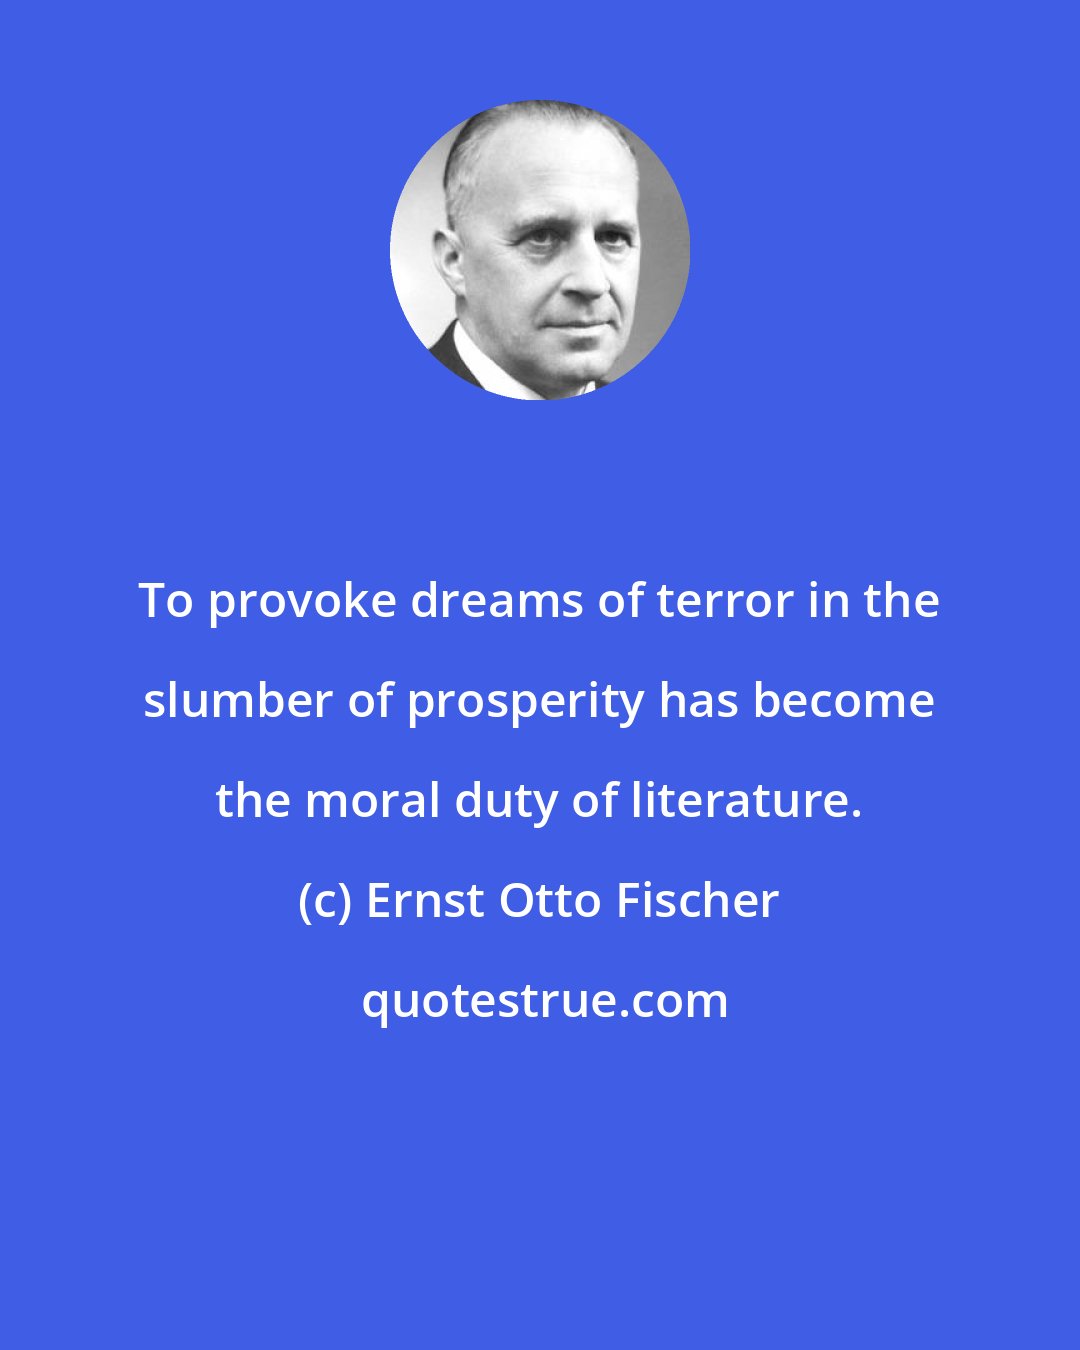 Ernst Otto Fischer: To provoke dreams of terror in the slumber of prosperity has become the moral duty of literature.